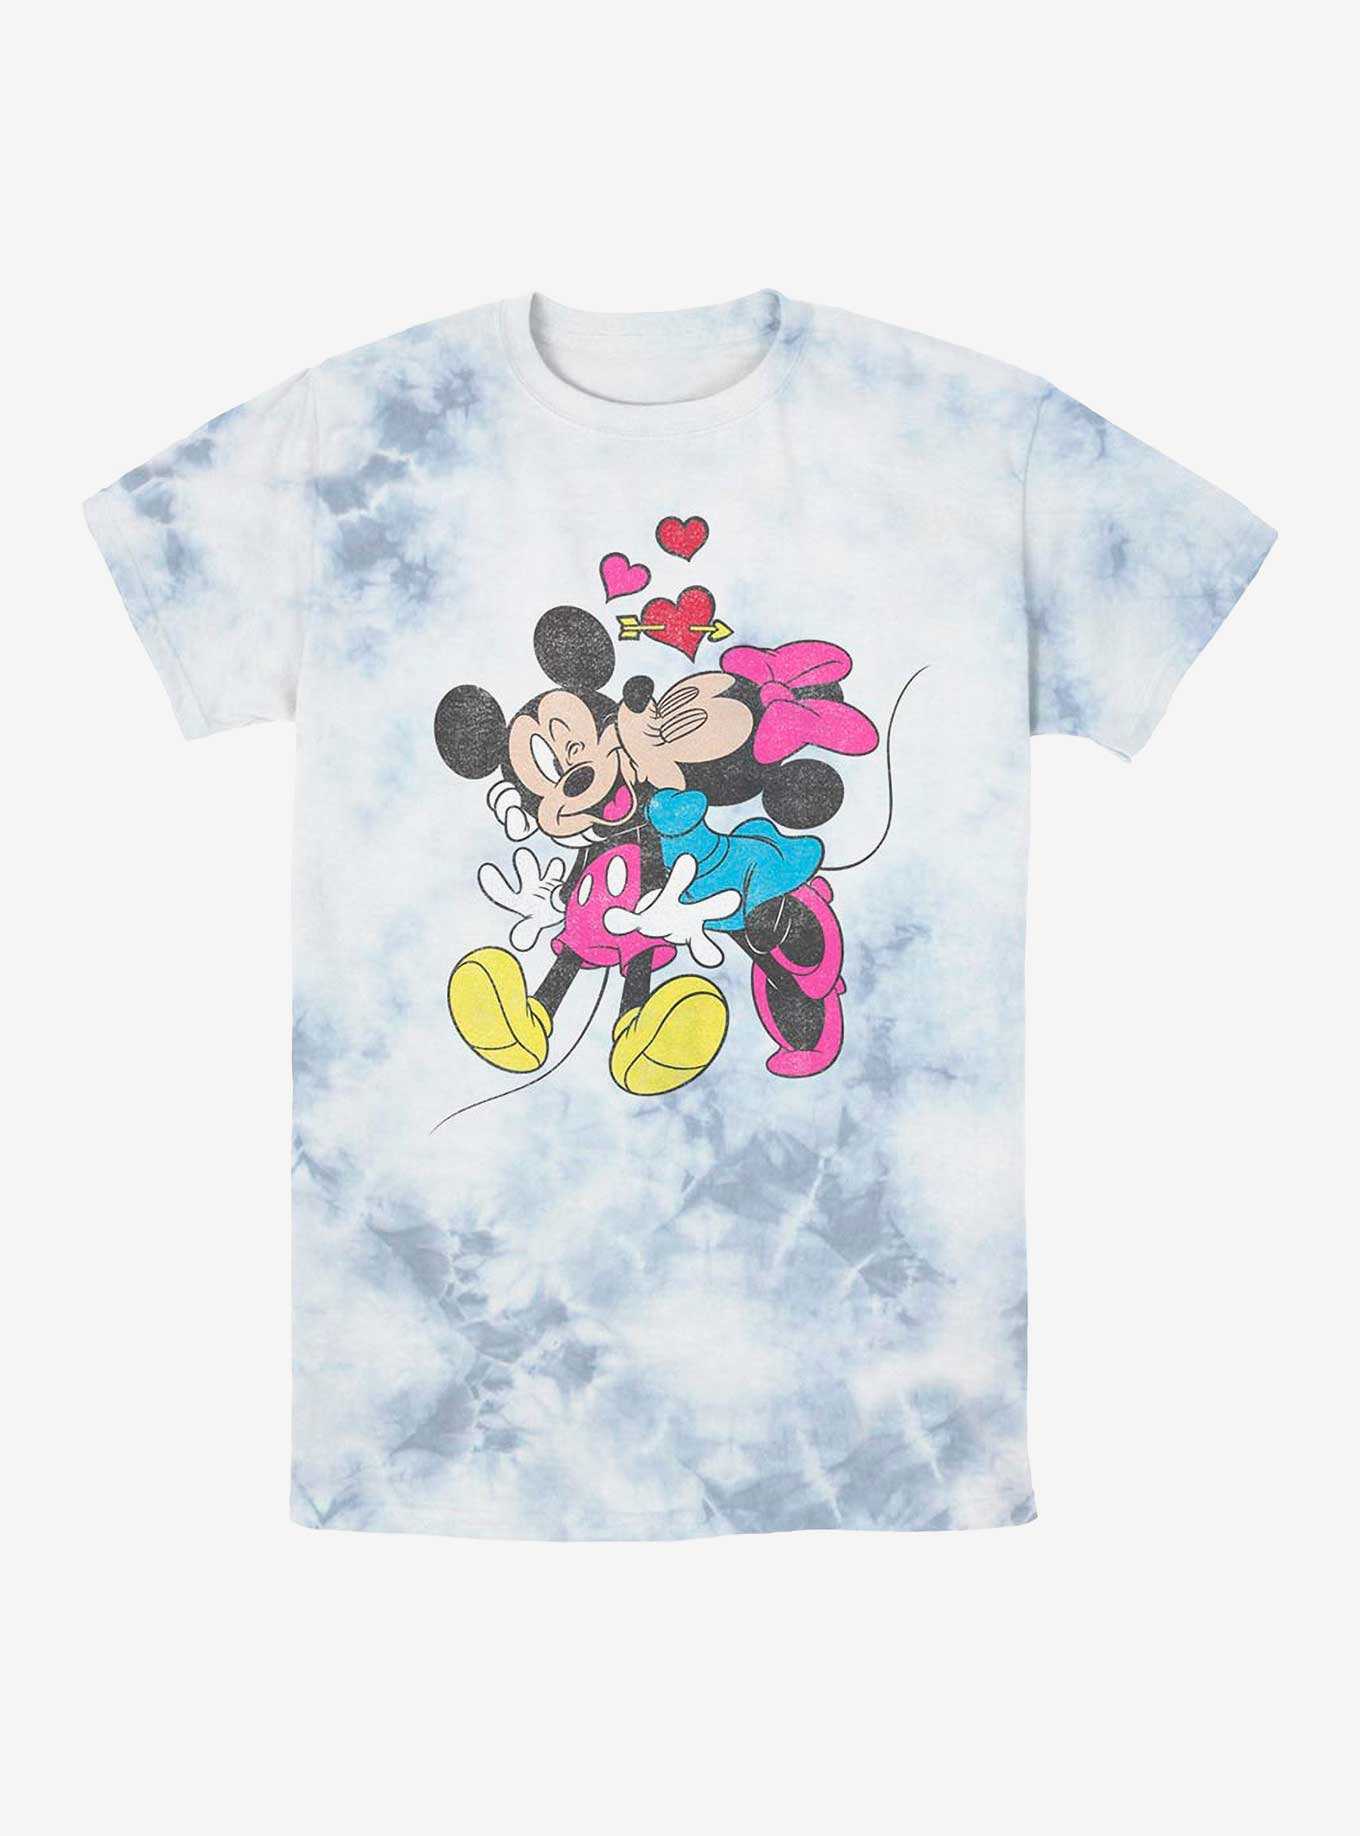 Disney Mickey Mouse And Minnie Love Tie-Dye T-Shirt, , hi-res